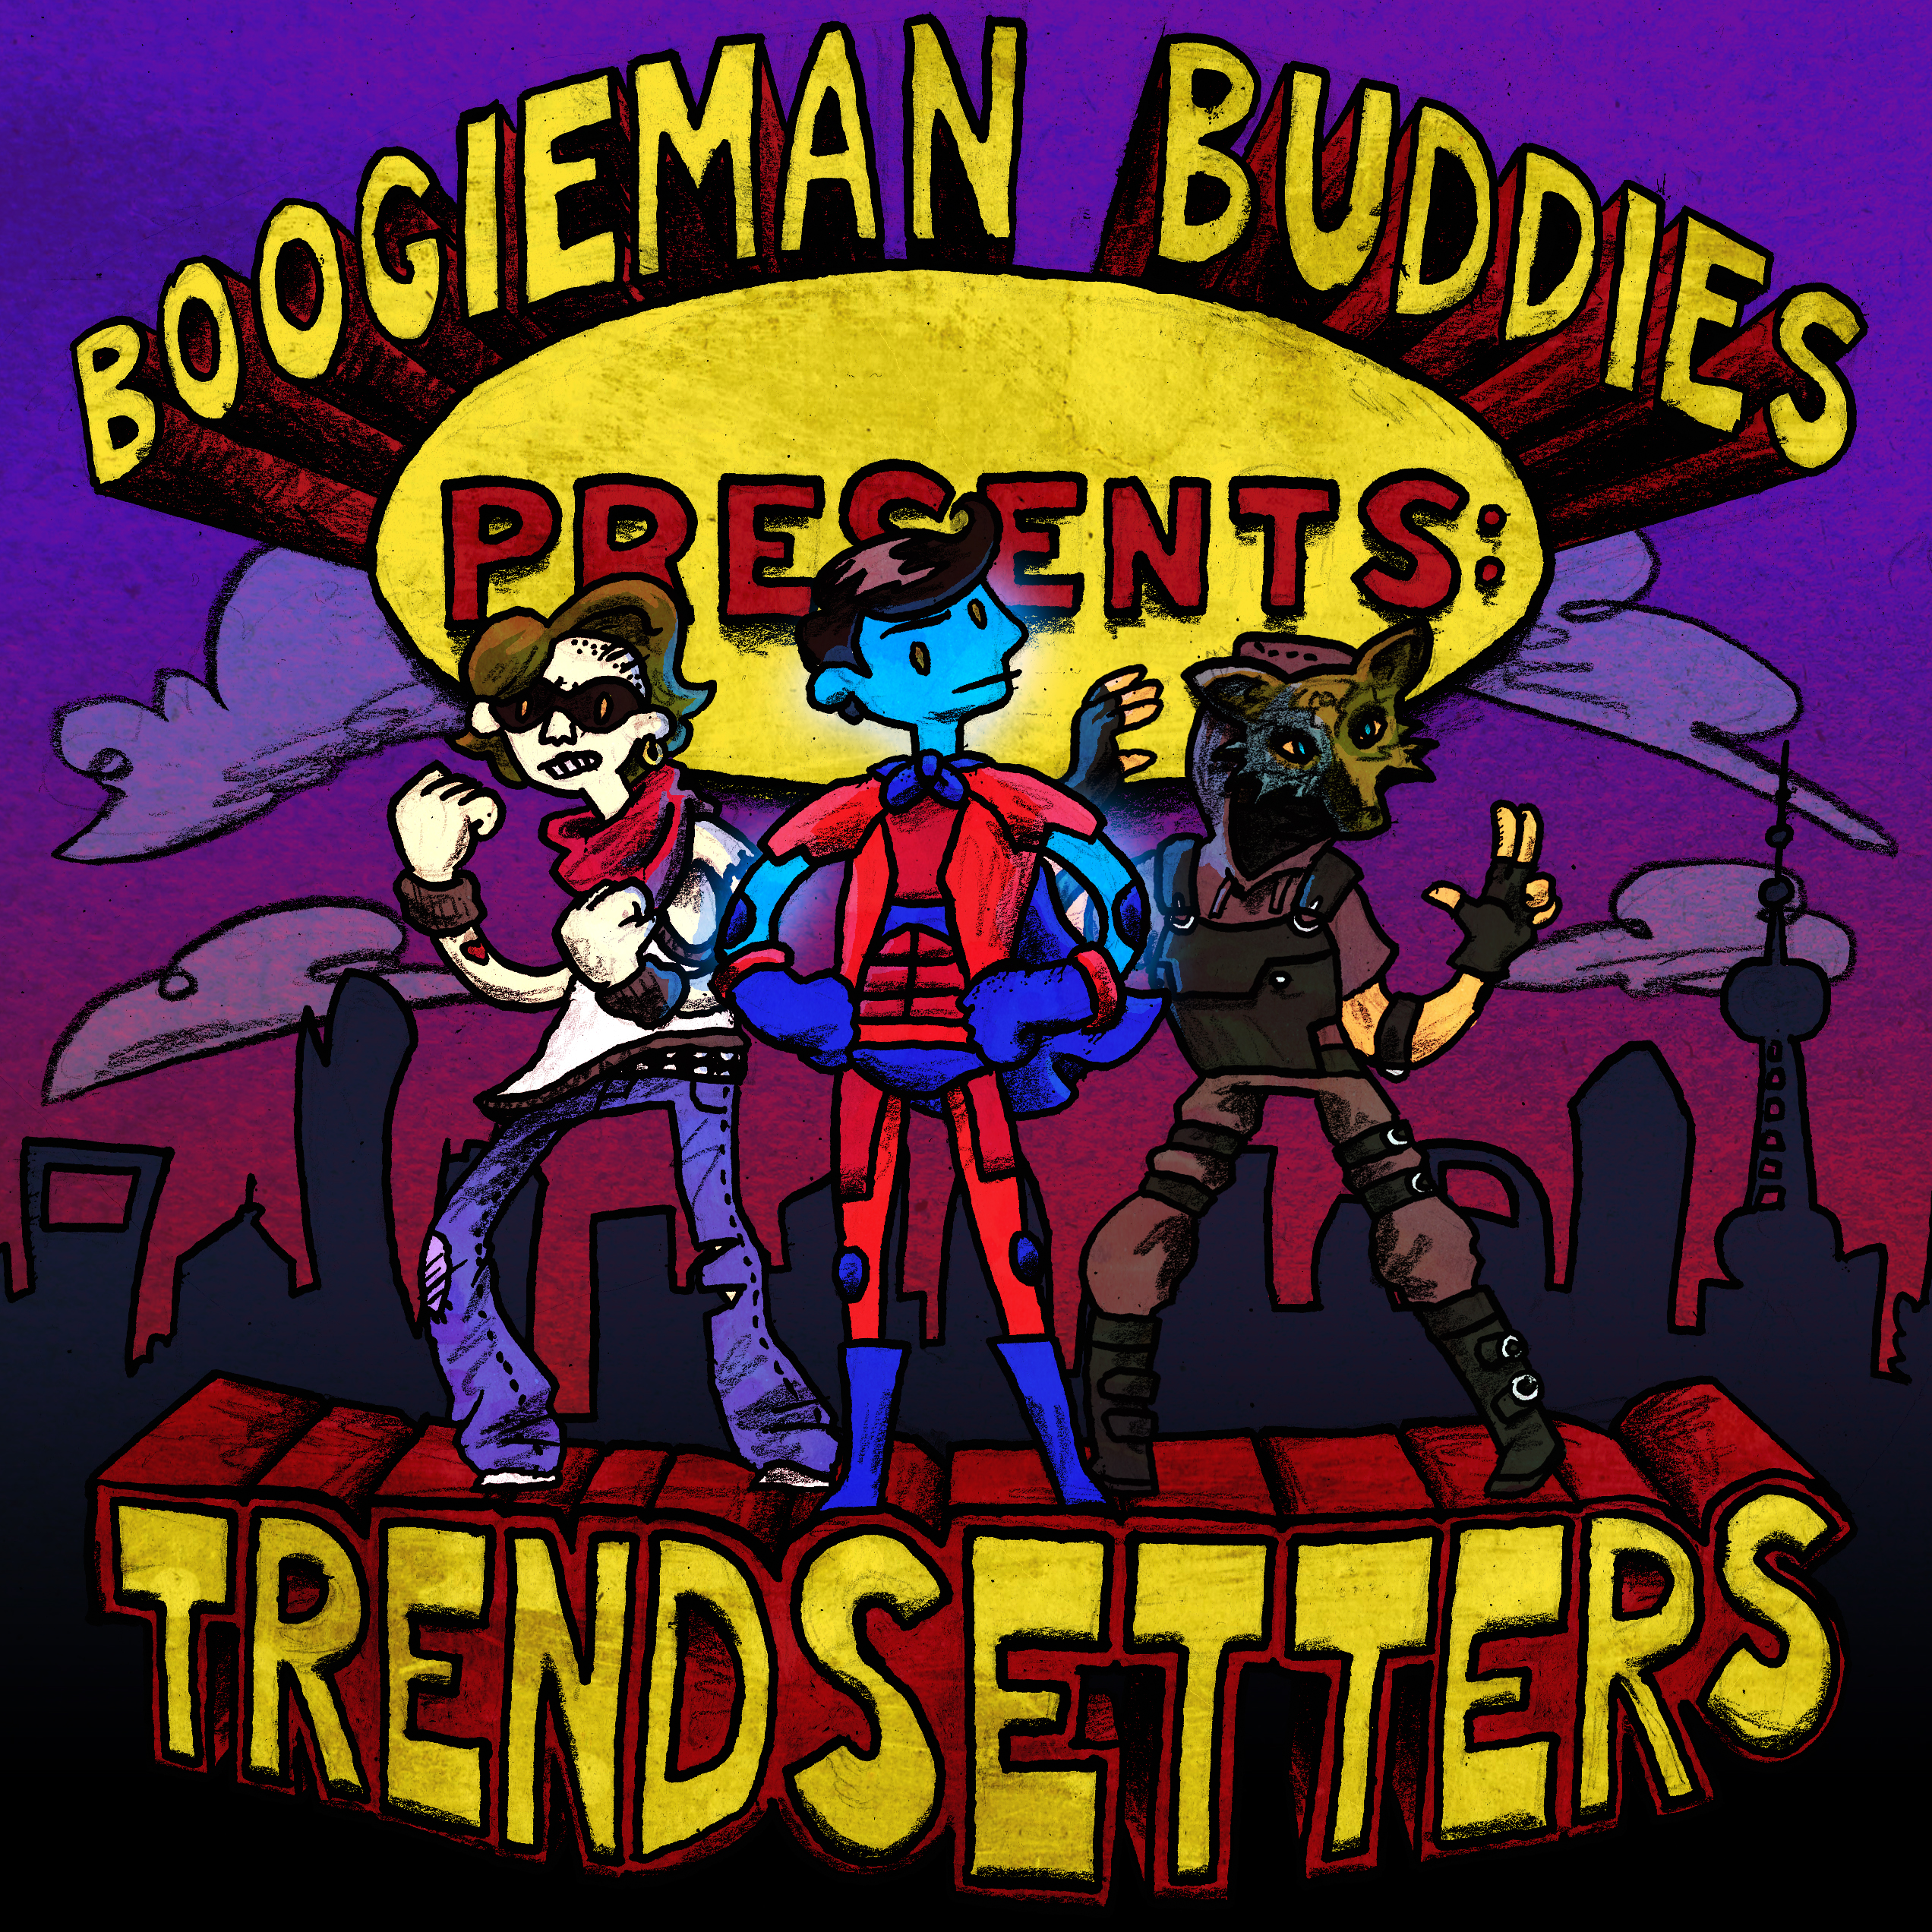 Trendsetters Issue 11 - Bad Bugs